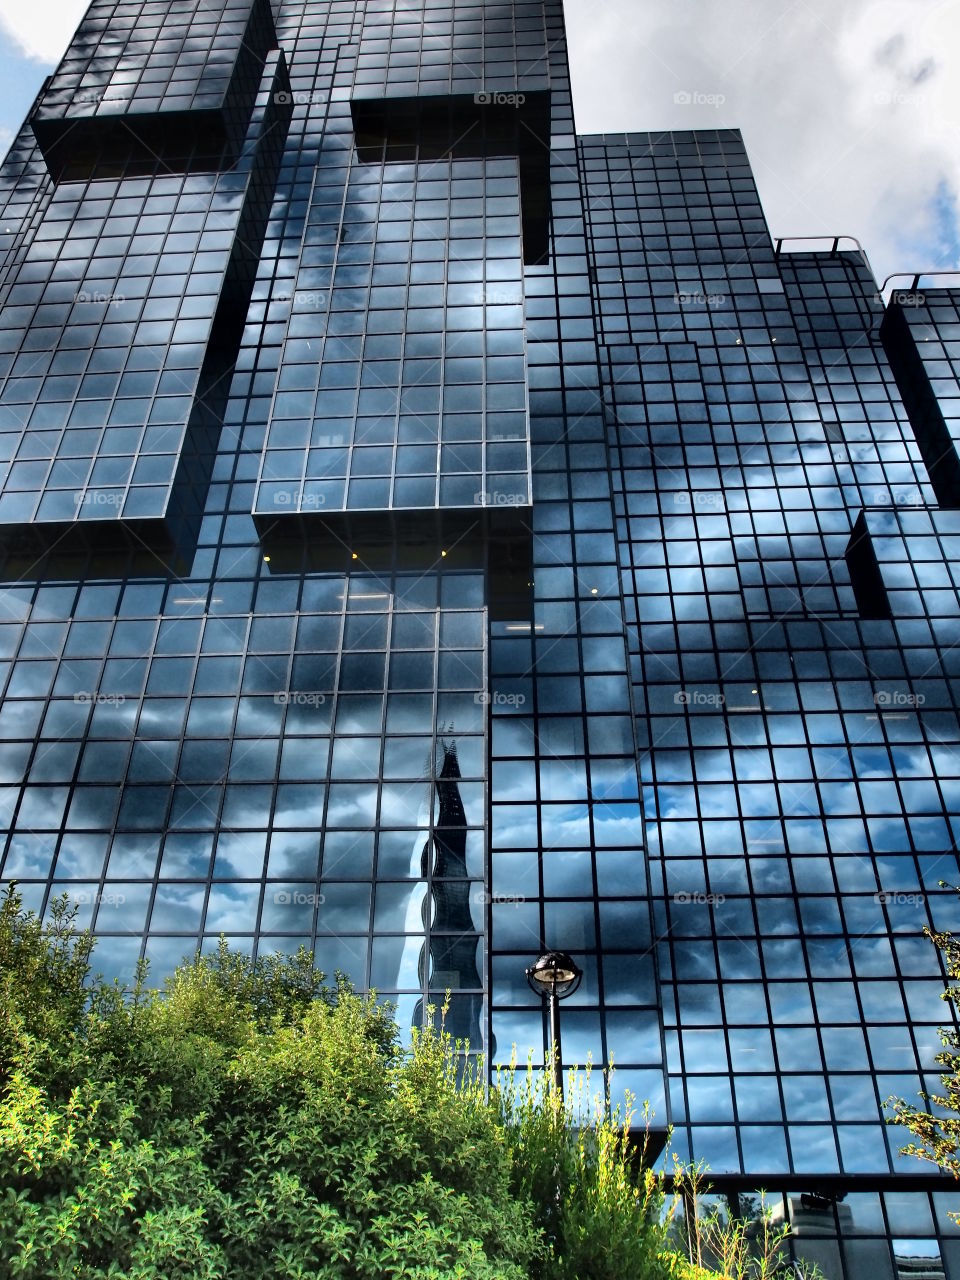 Amazing modules on a glass building reflecting the clouds in the sky in London exhibiting creative modern architecture. 